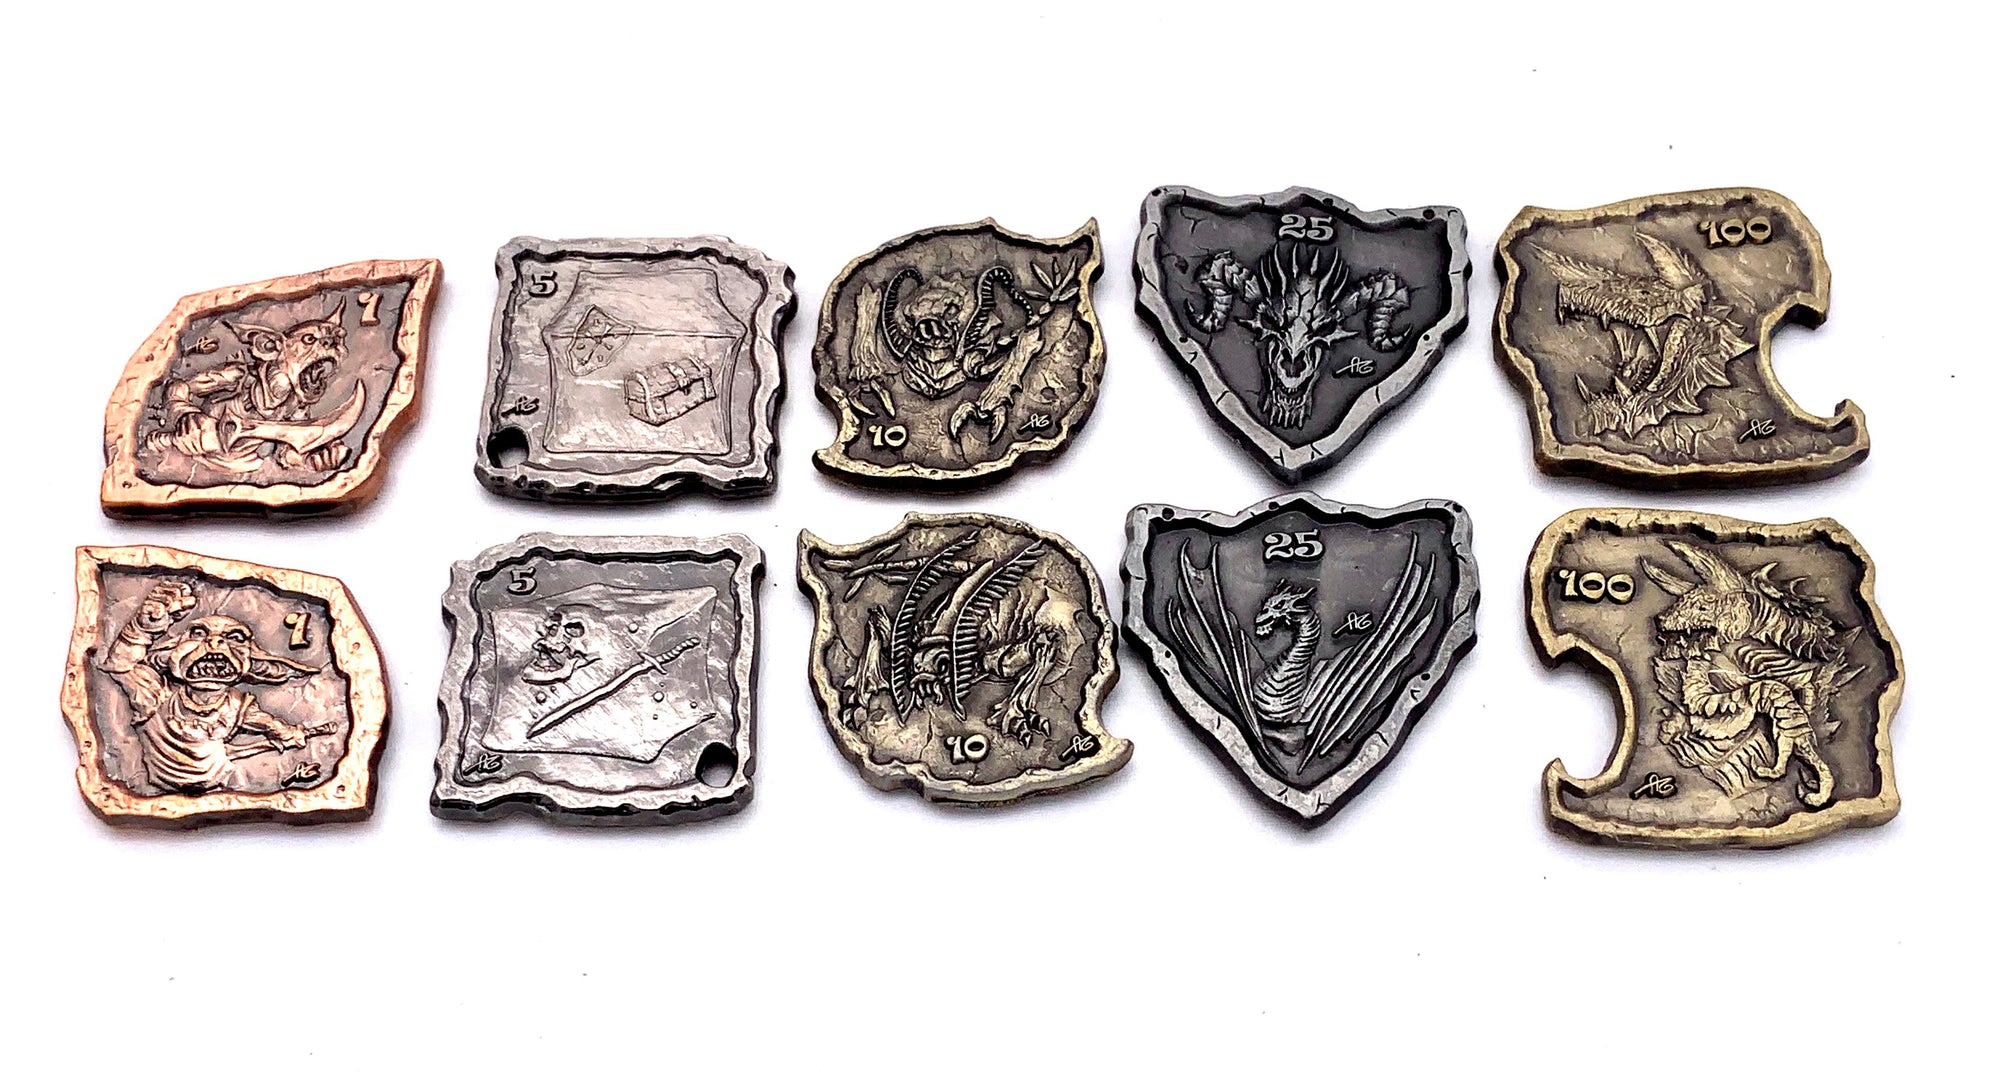 More D&D Monster Coins - (Set of 10 Metal Plated Novelty)-Tokens-Cryptic Creative-dice coin-dnd coins-rpg coins-LARP Coins-Cryptic Creative